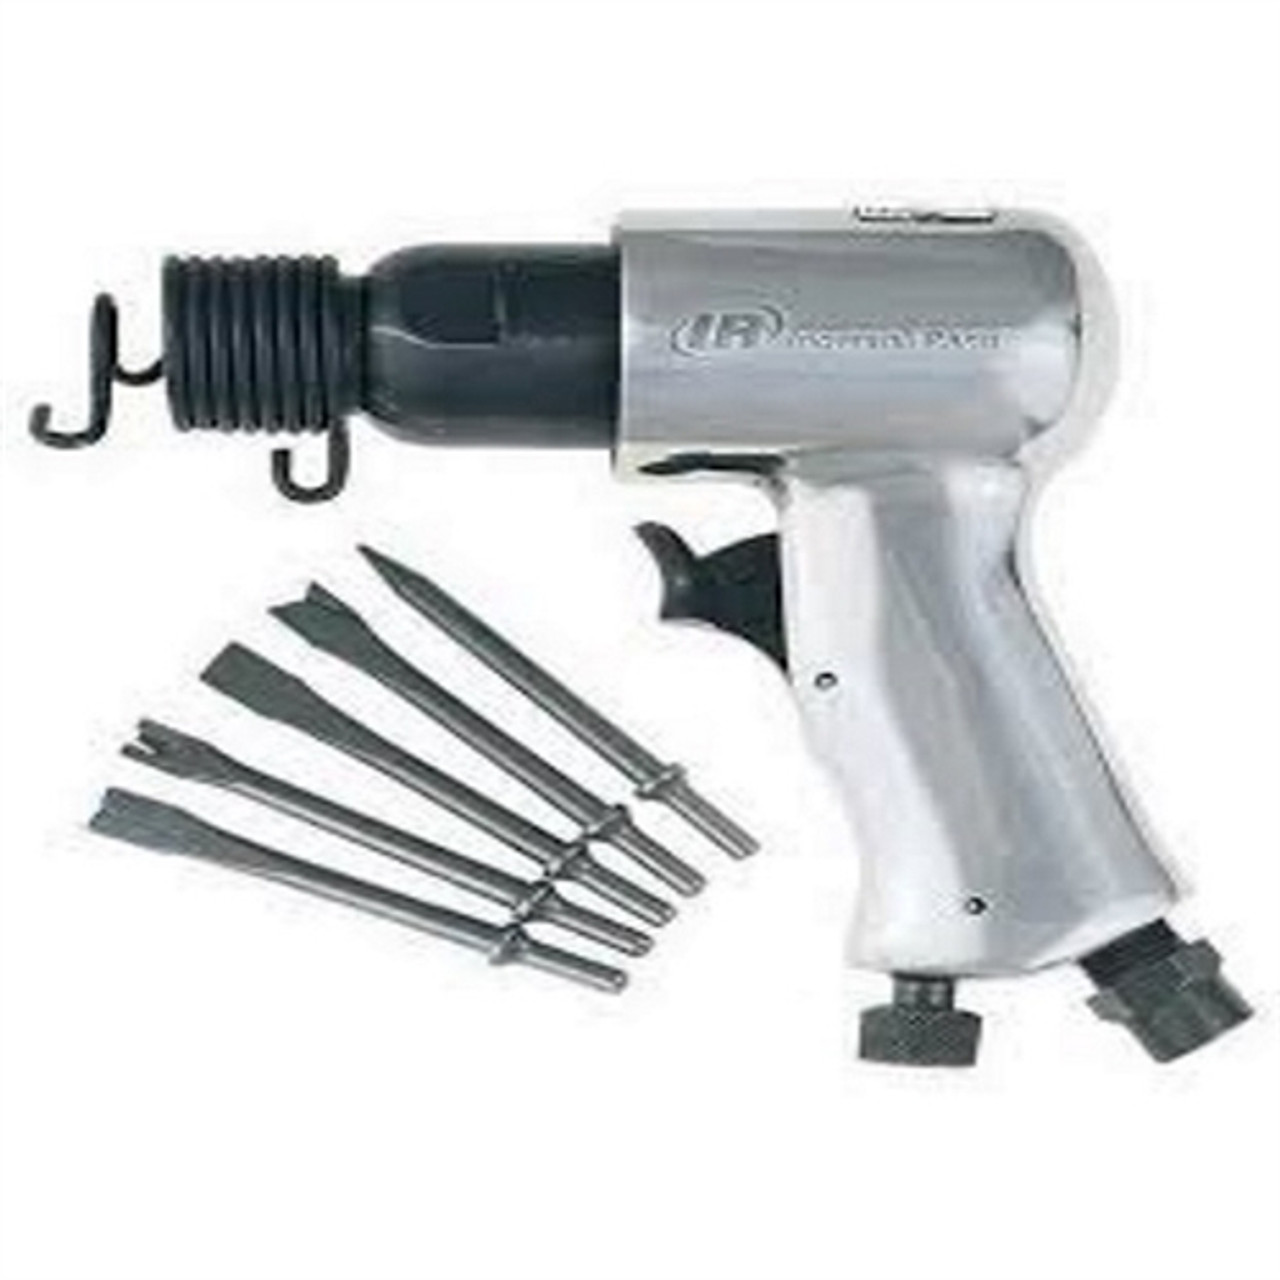 Ingersoll Rand 117K Air Hammer with Pc. Chisels